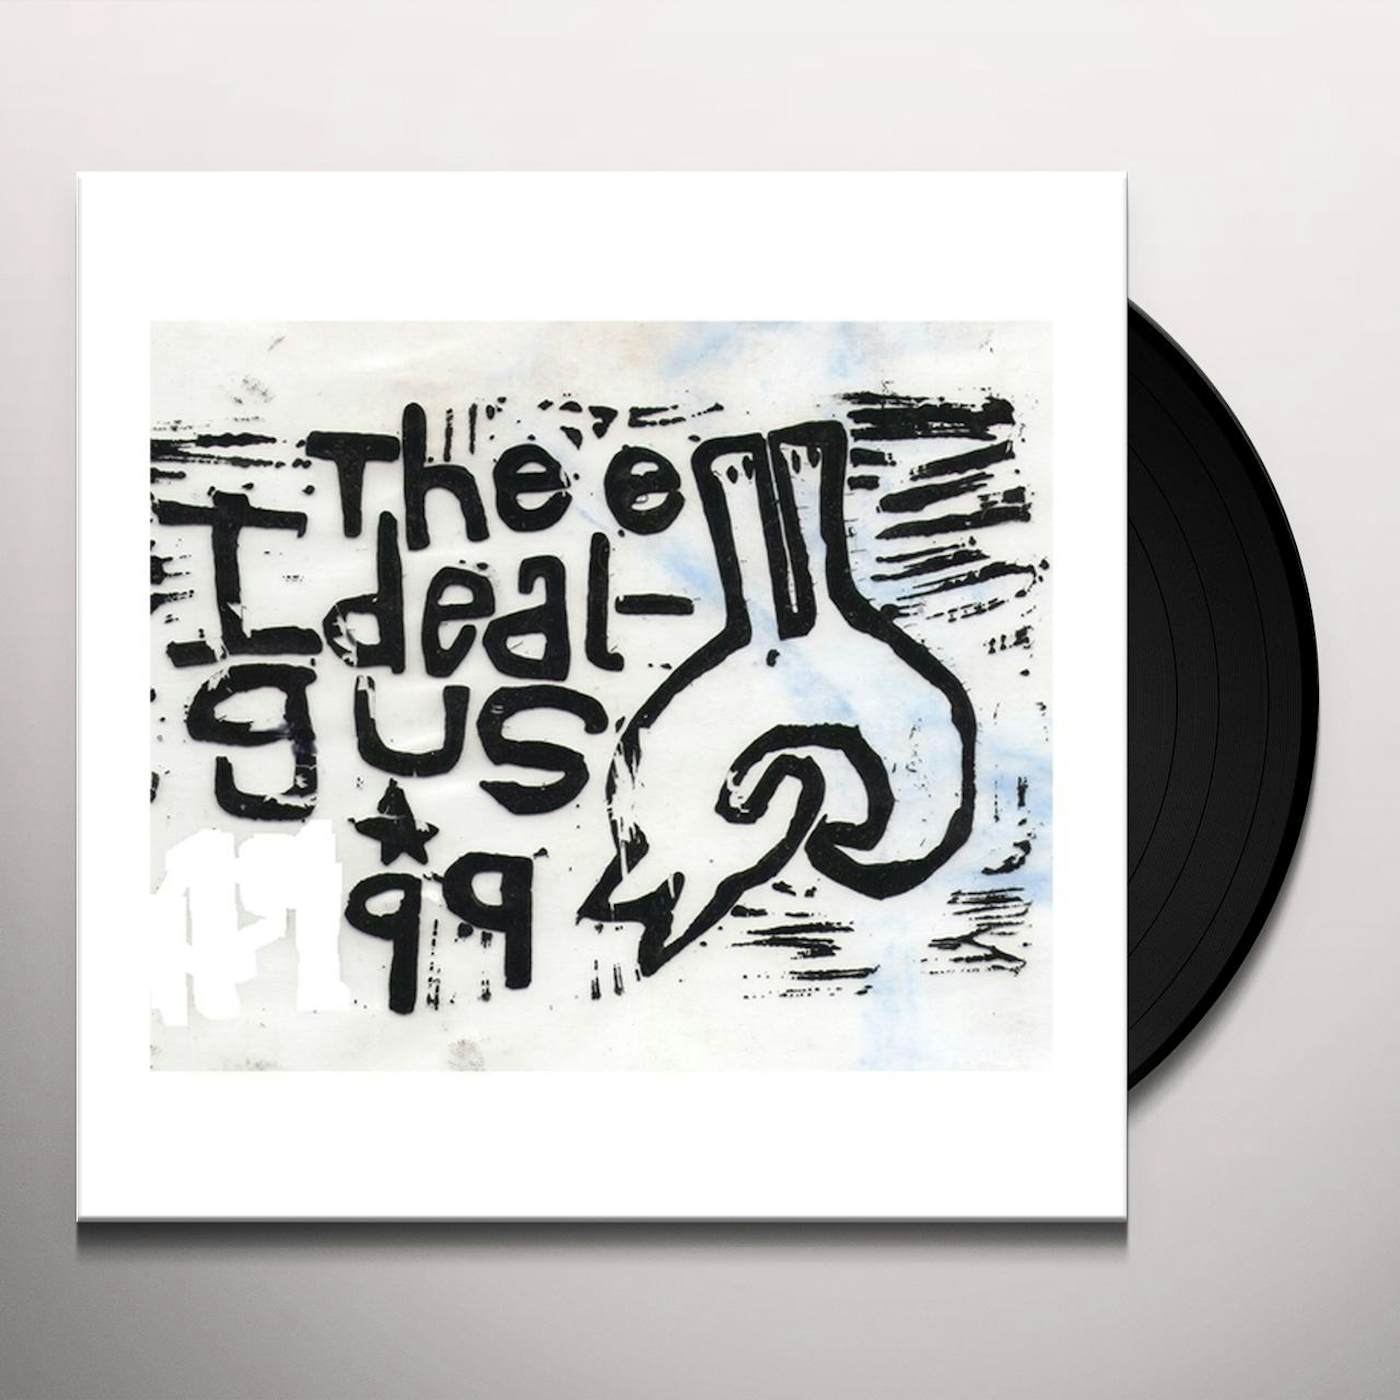 THEE IDEAL GUS 99 Vinyl Record